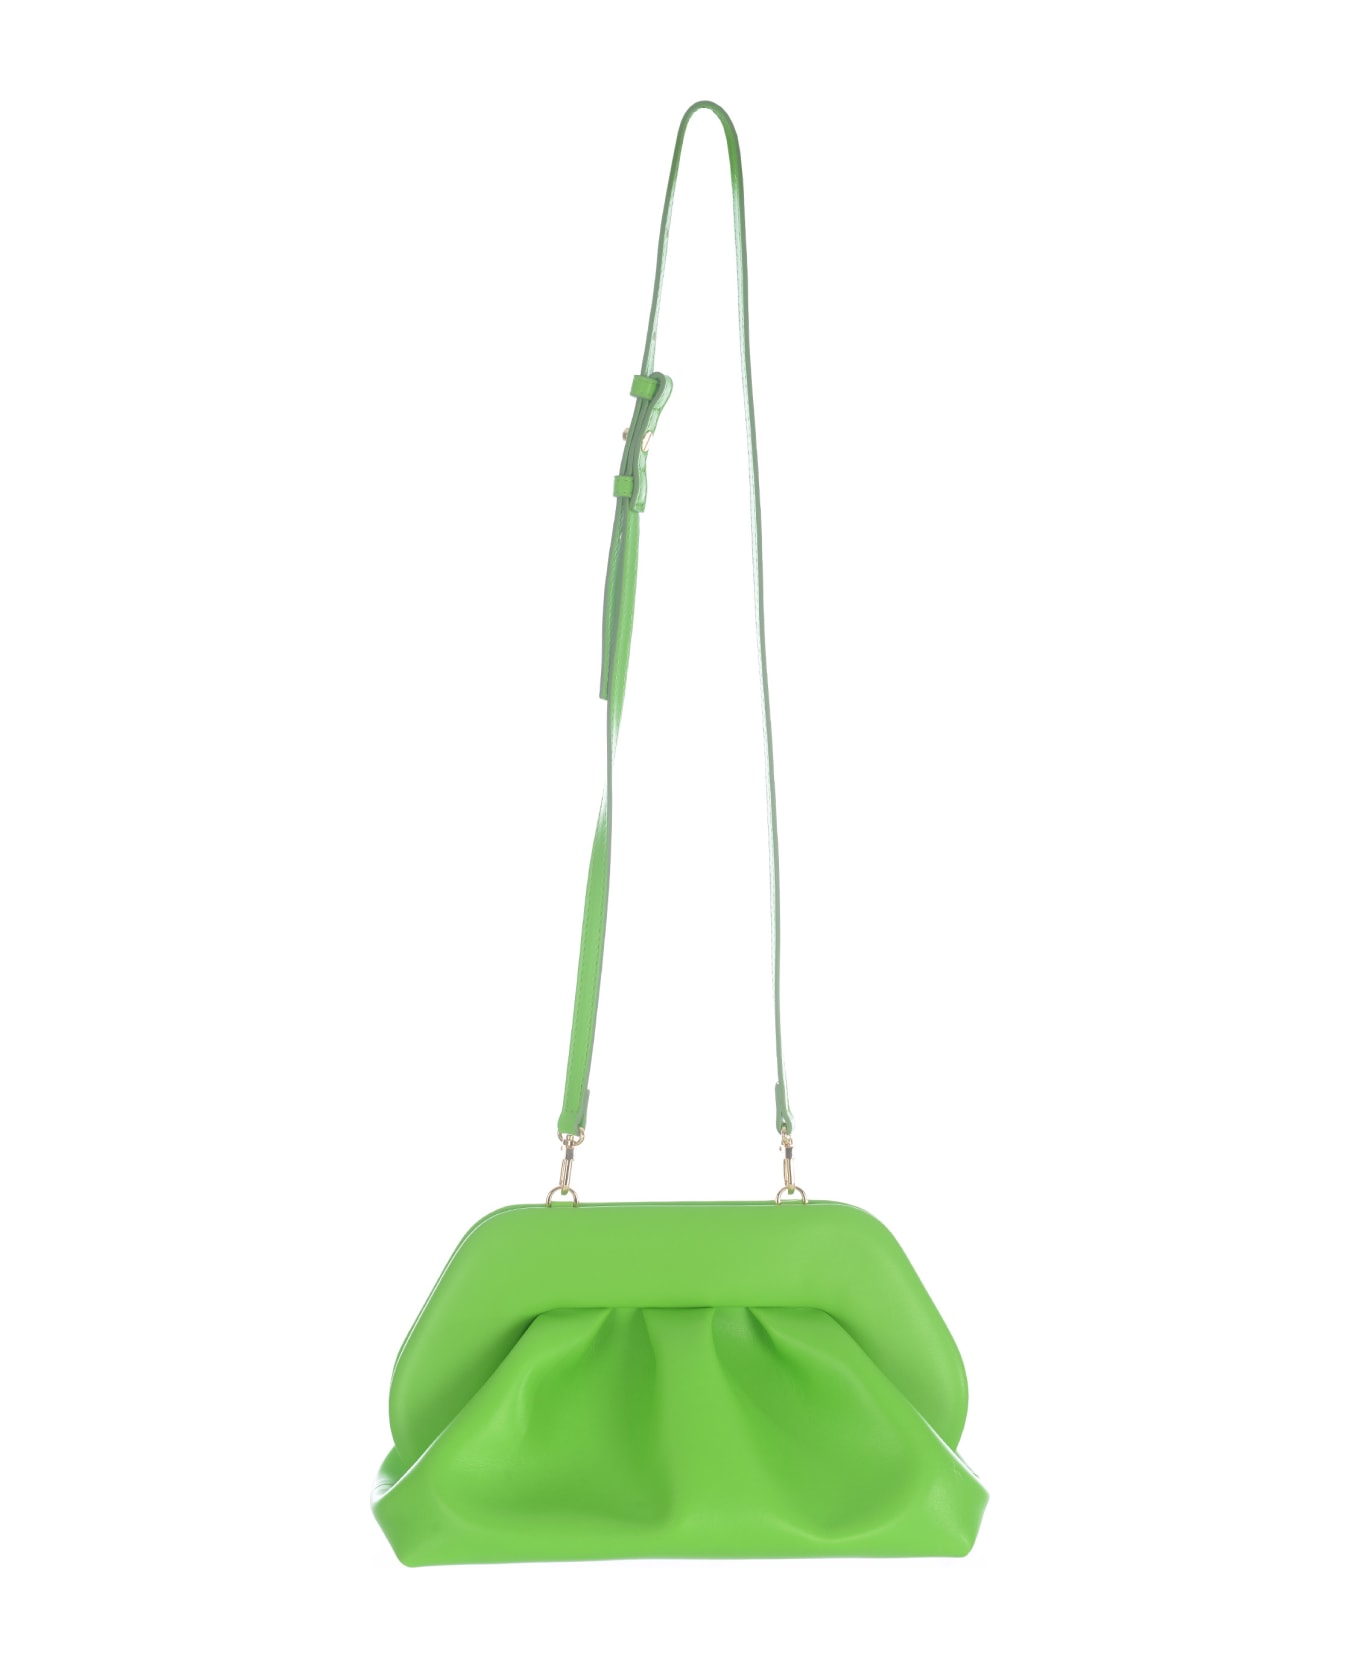 THEMOIRè Bag Themoiré "tia" In Faux Leather - Verde acido クラッチバッグ